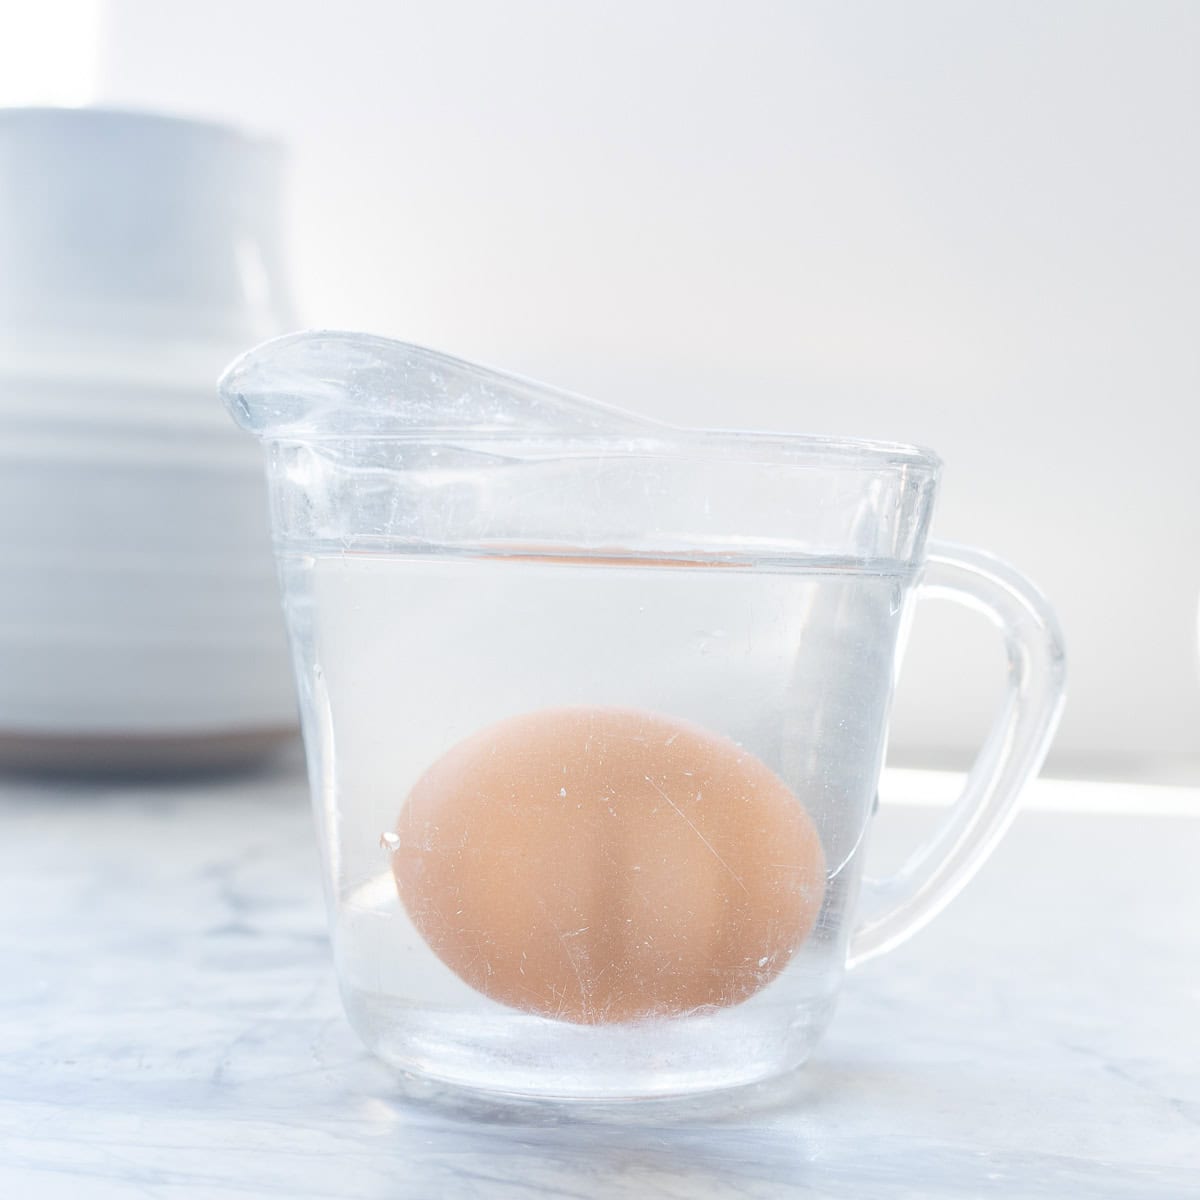 An egg in a microwave proof cup filled with water.